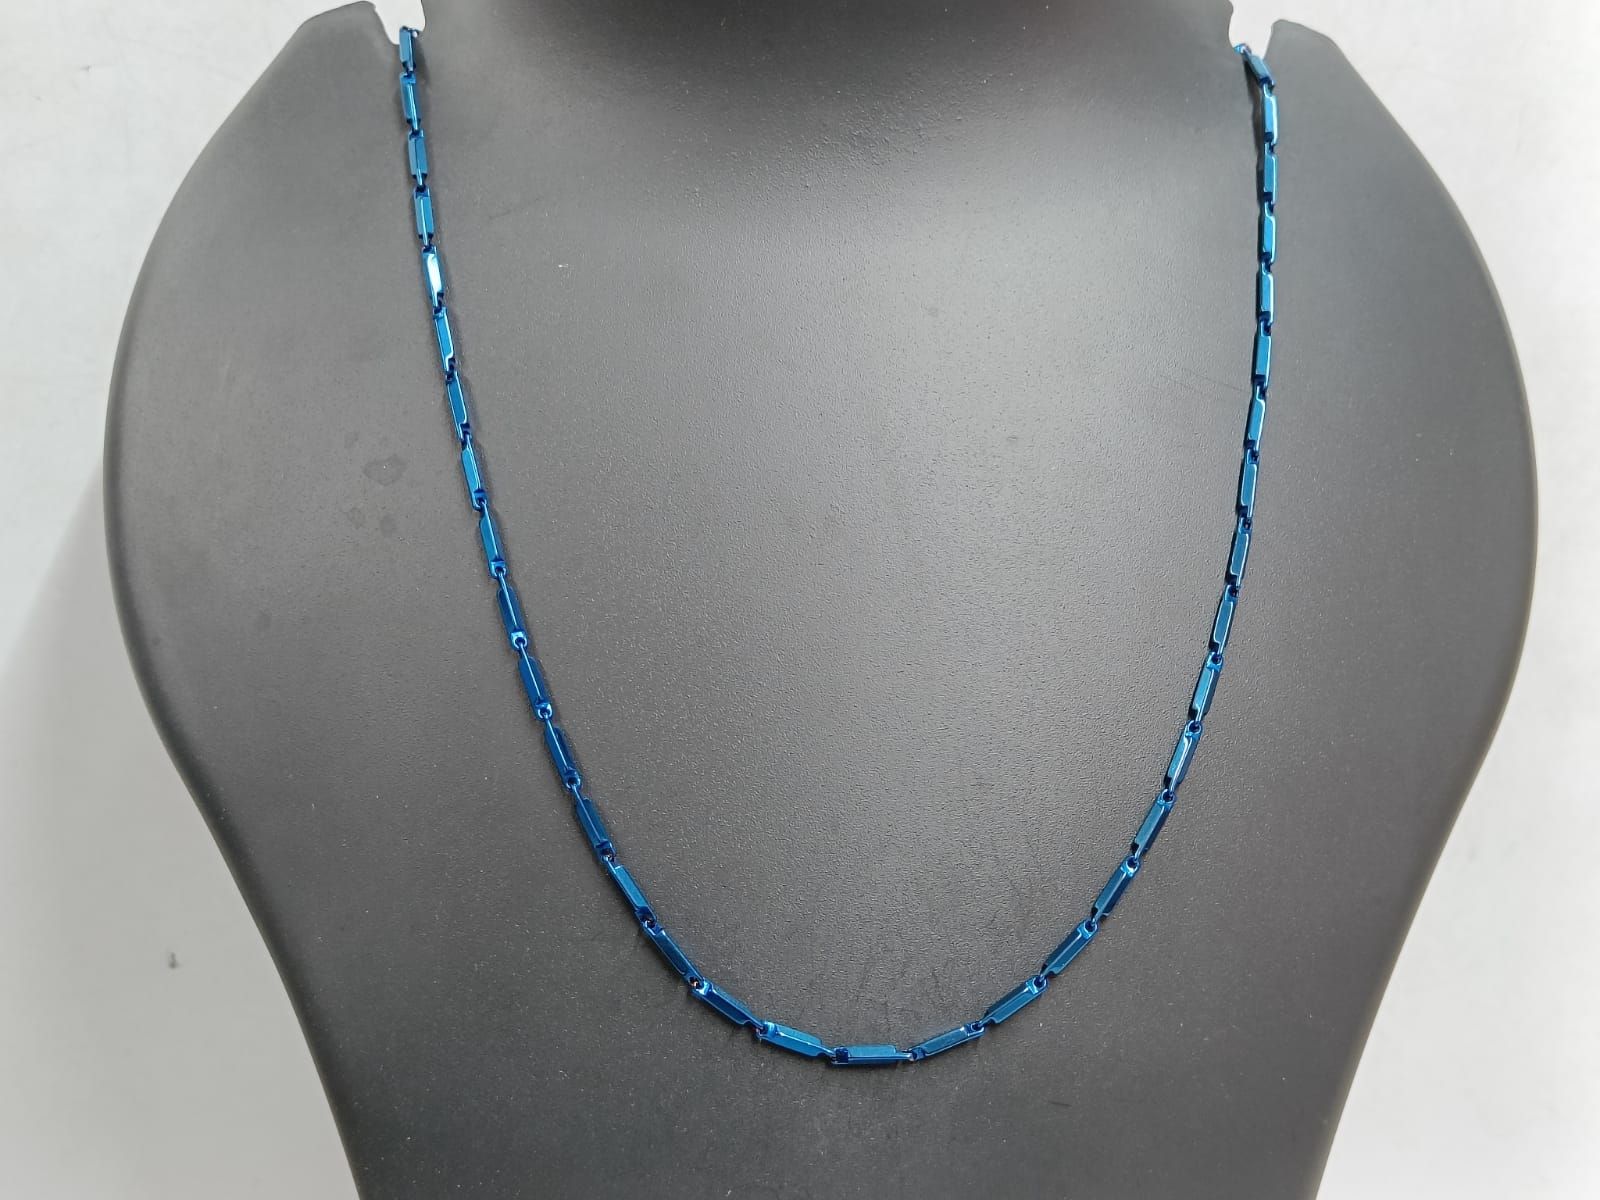 Mens Necklace, Blue Bead Necklace Men, Protection Necklace, Beaded Necklace,  Gift for Him, Made in Greece. - Etsy | Men necklace, Beaded necklace,  Protection necklace